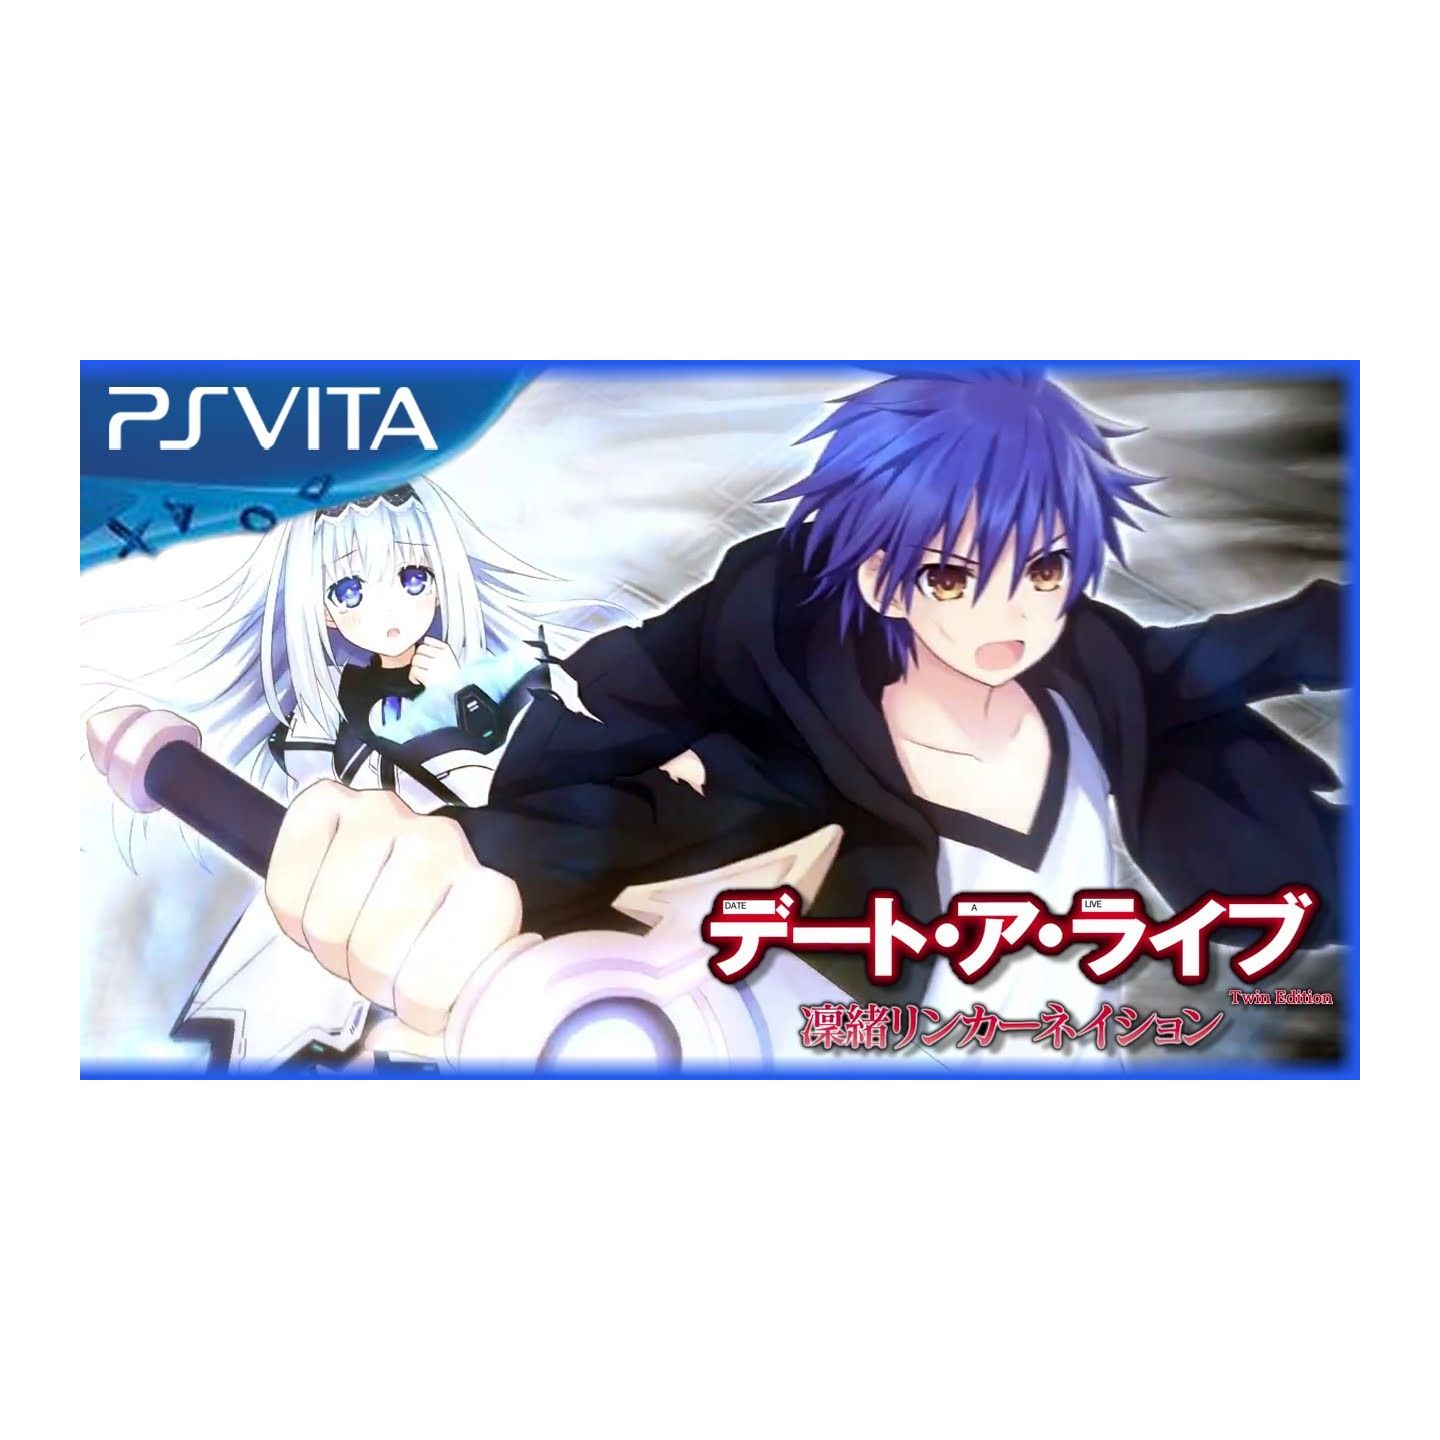 Date A Live Twin Edition: Rio Reincarnation for PlayStation Vita